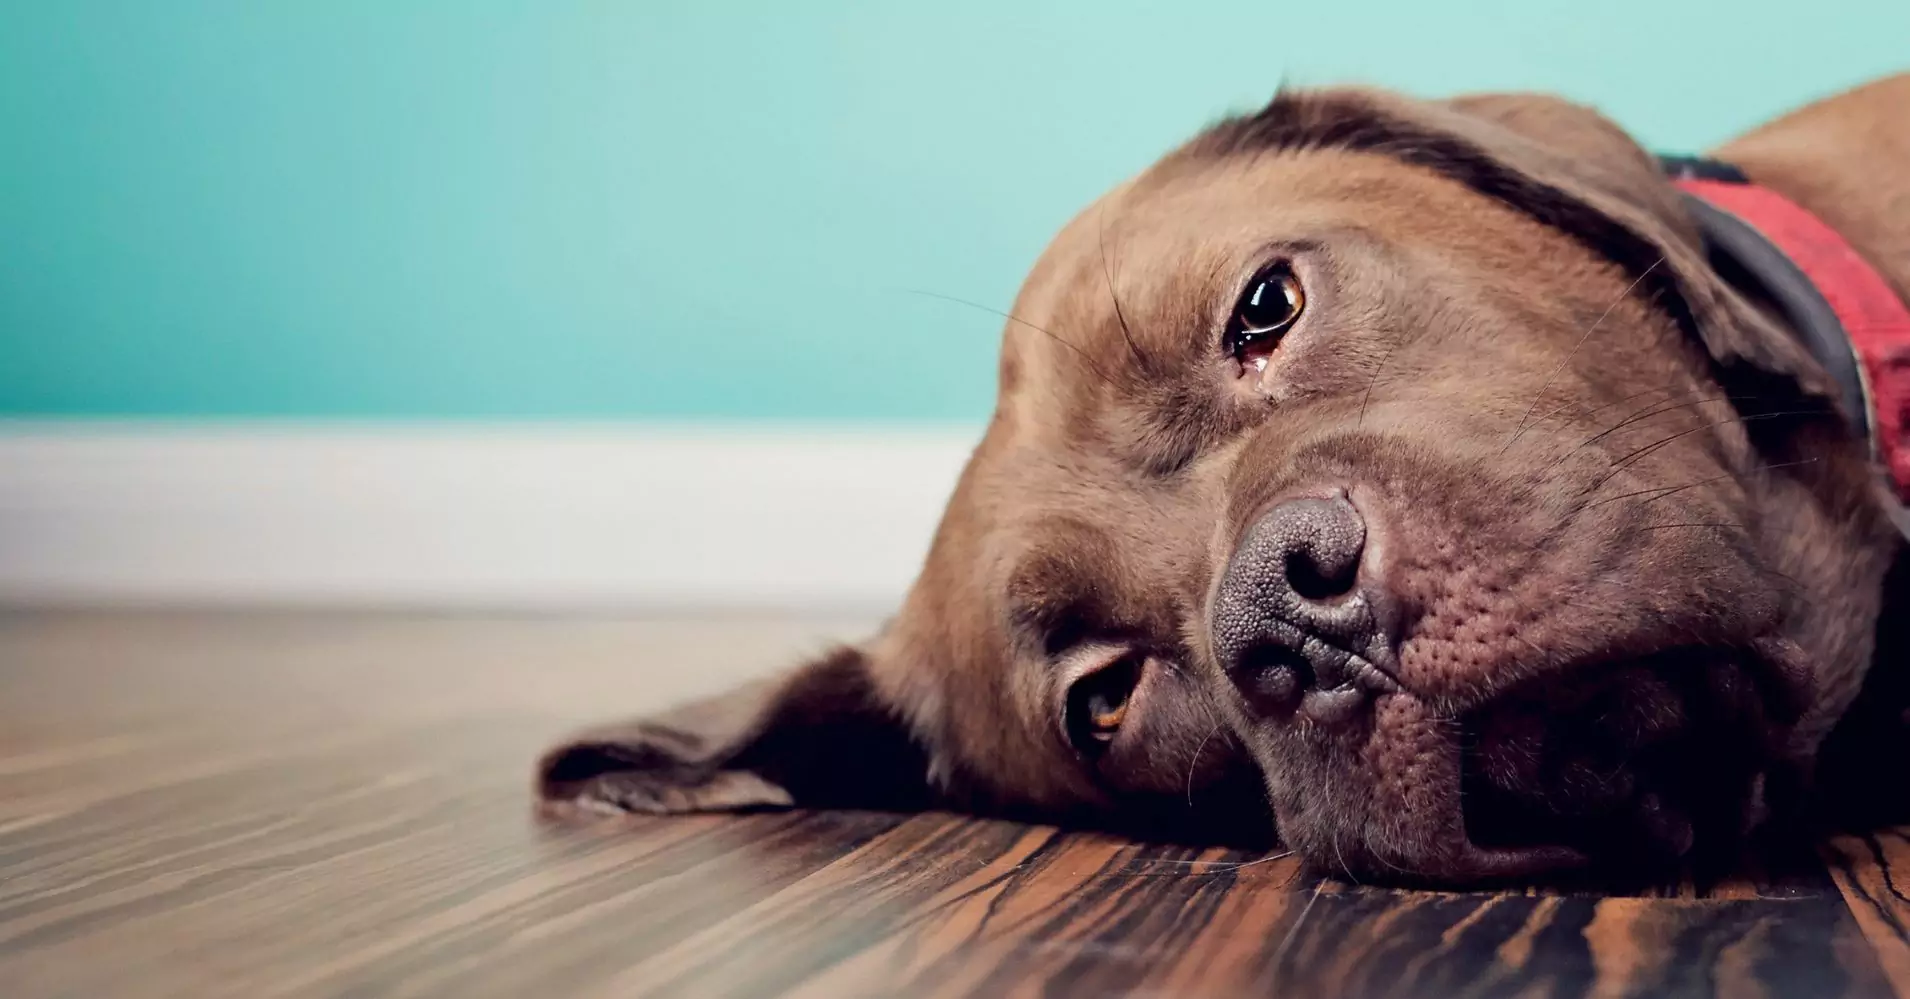 Can dogs feel sadness?